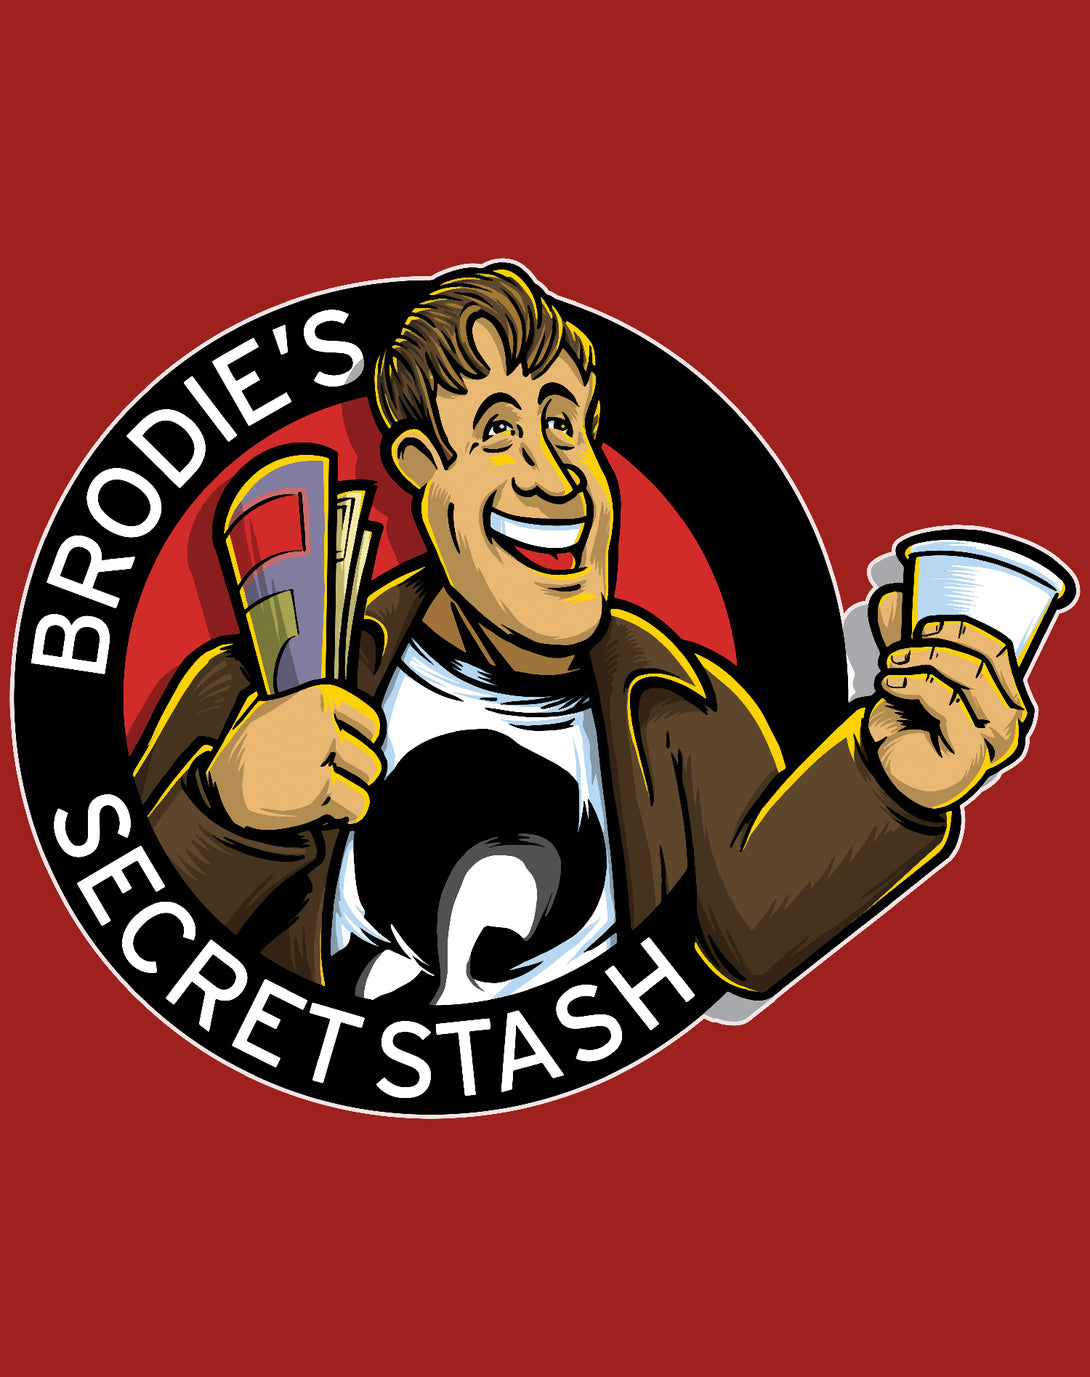 Kevin Smith Jay & Silent Bob Reboot Brodie's Secret Stash Comic Book Store Logo Official Men's T-Shirt Red - Urban Species Design Close Up